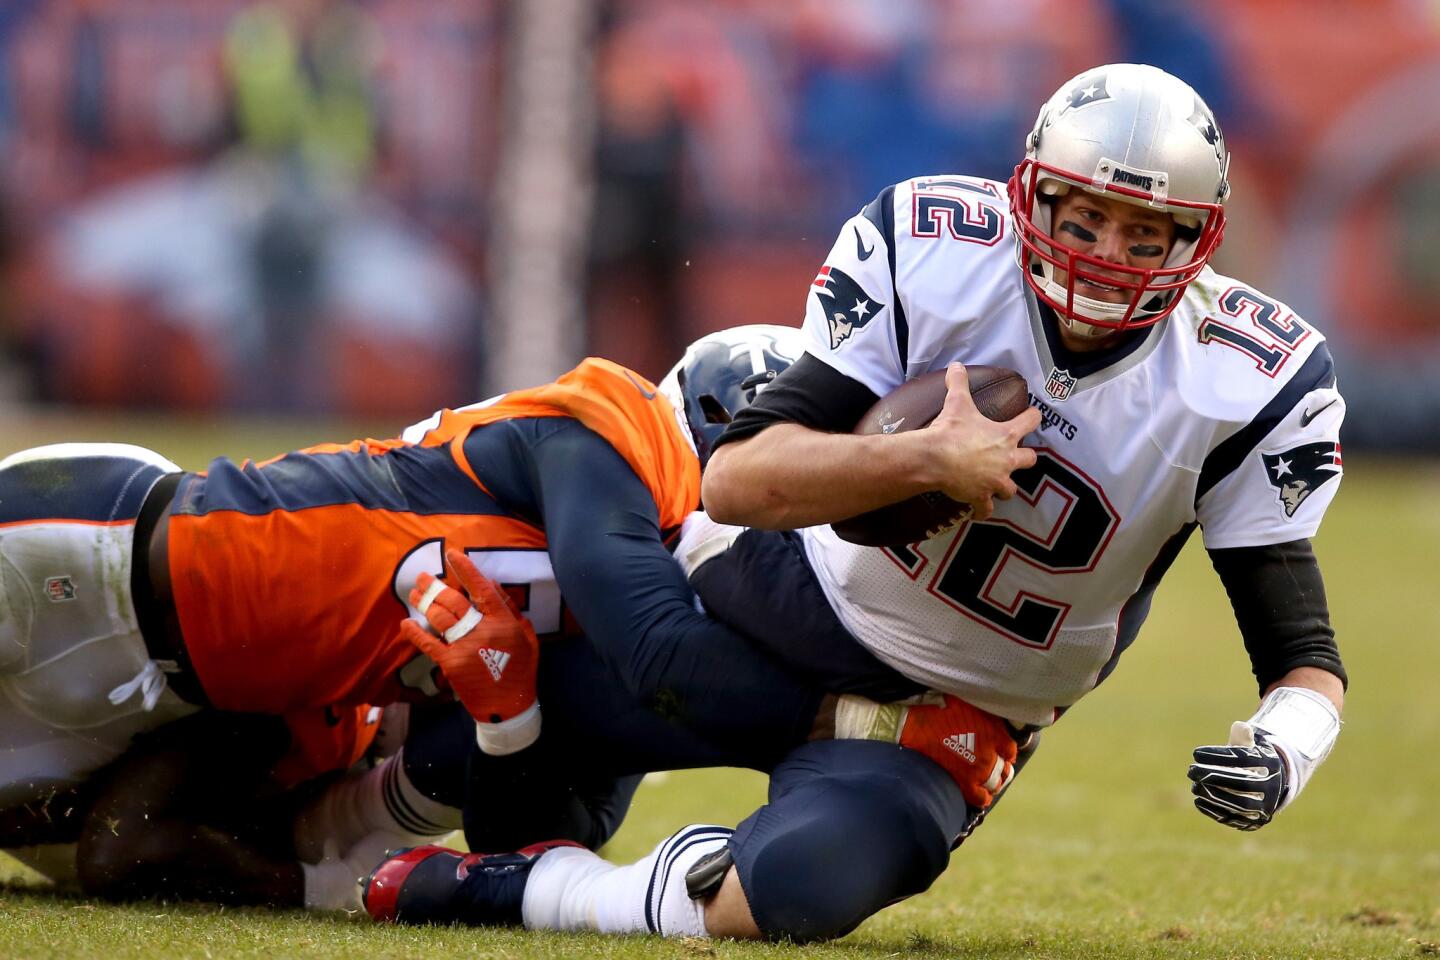 New England quarterback Tom Brady is sacked by Denver linebacker Von MIller during the second quarter of the AFC Championship game on Jan. 24.